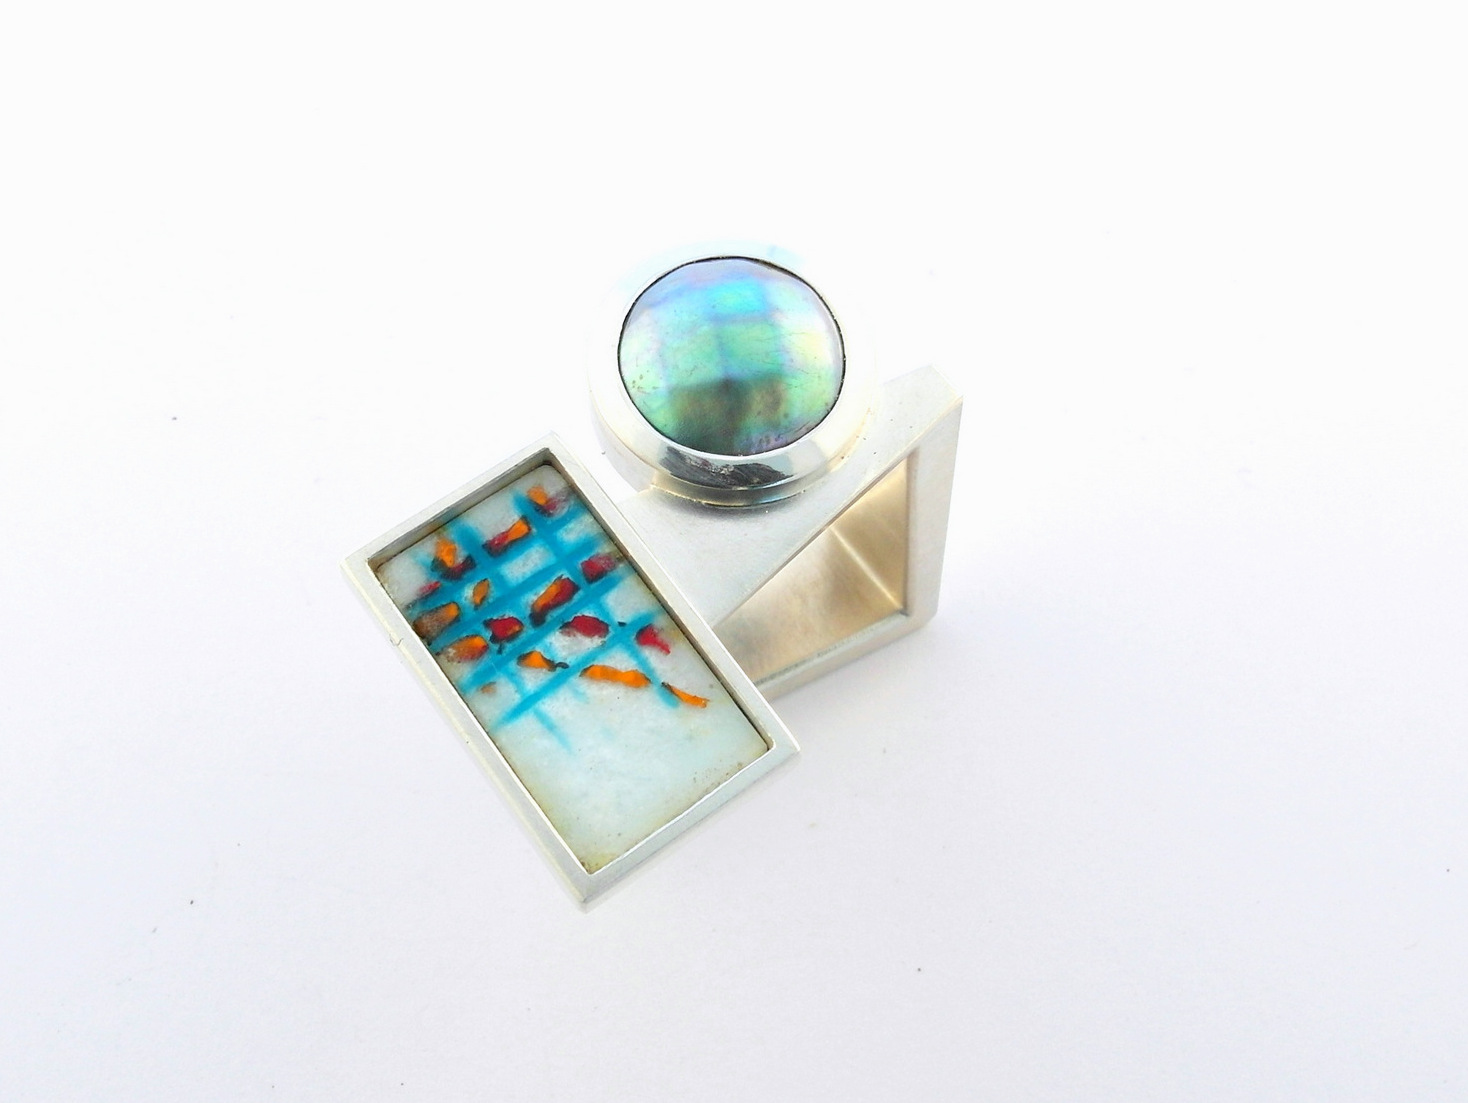  Margaret's MAPA pearl and enamel ring by Dore Stockhausen 2014 - 925 silver, MAPA pearl, enamel (Private collection) 